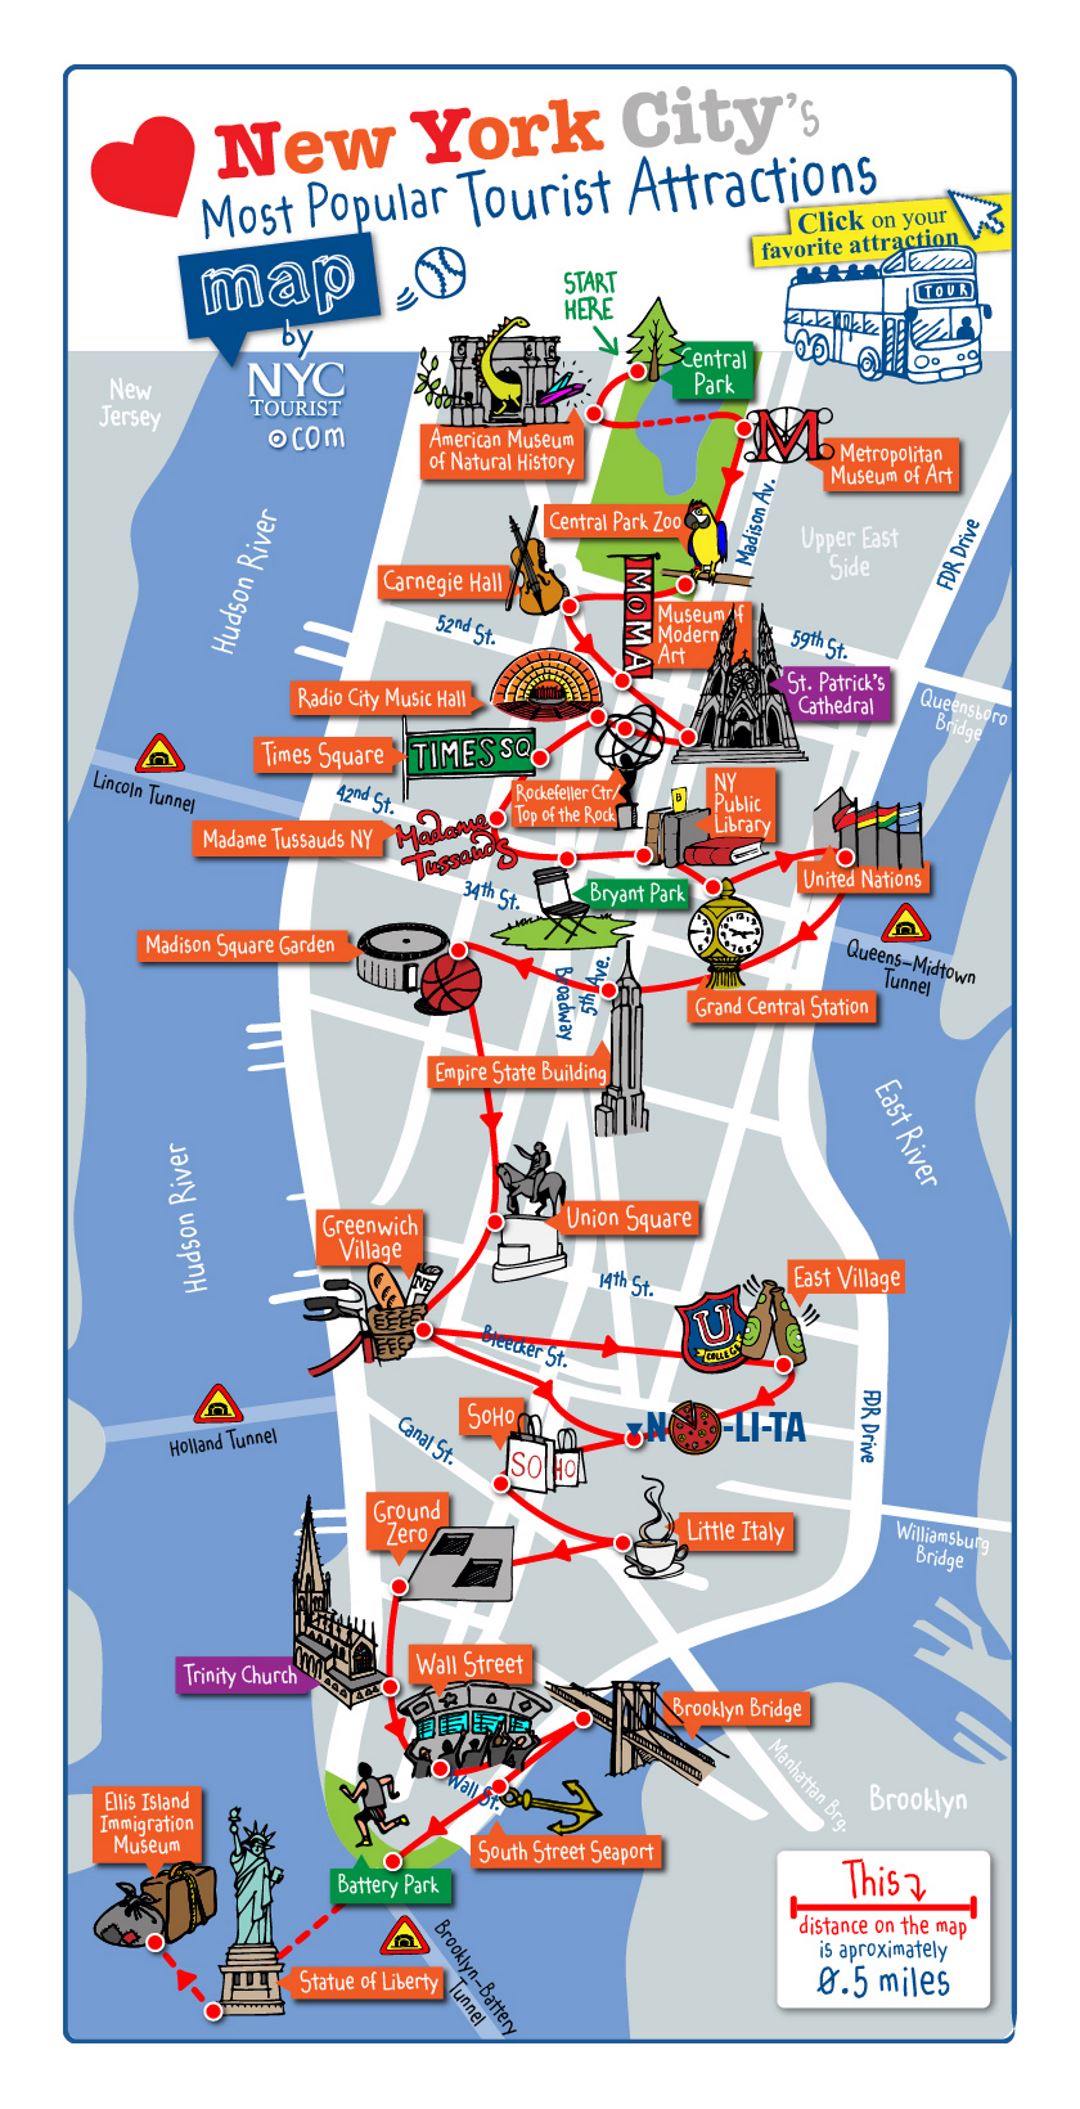 Detailed map of most popular tourist attractions of Manhattan, NYC